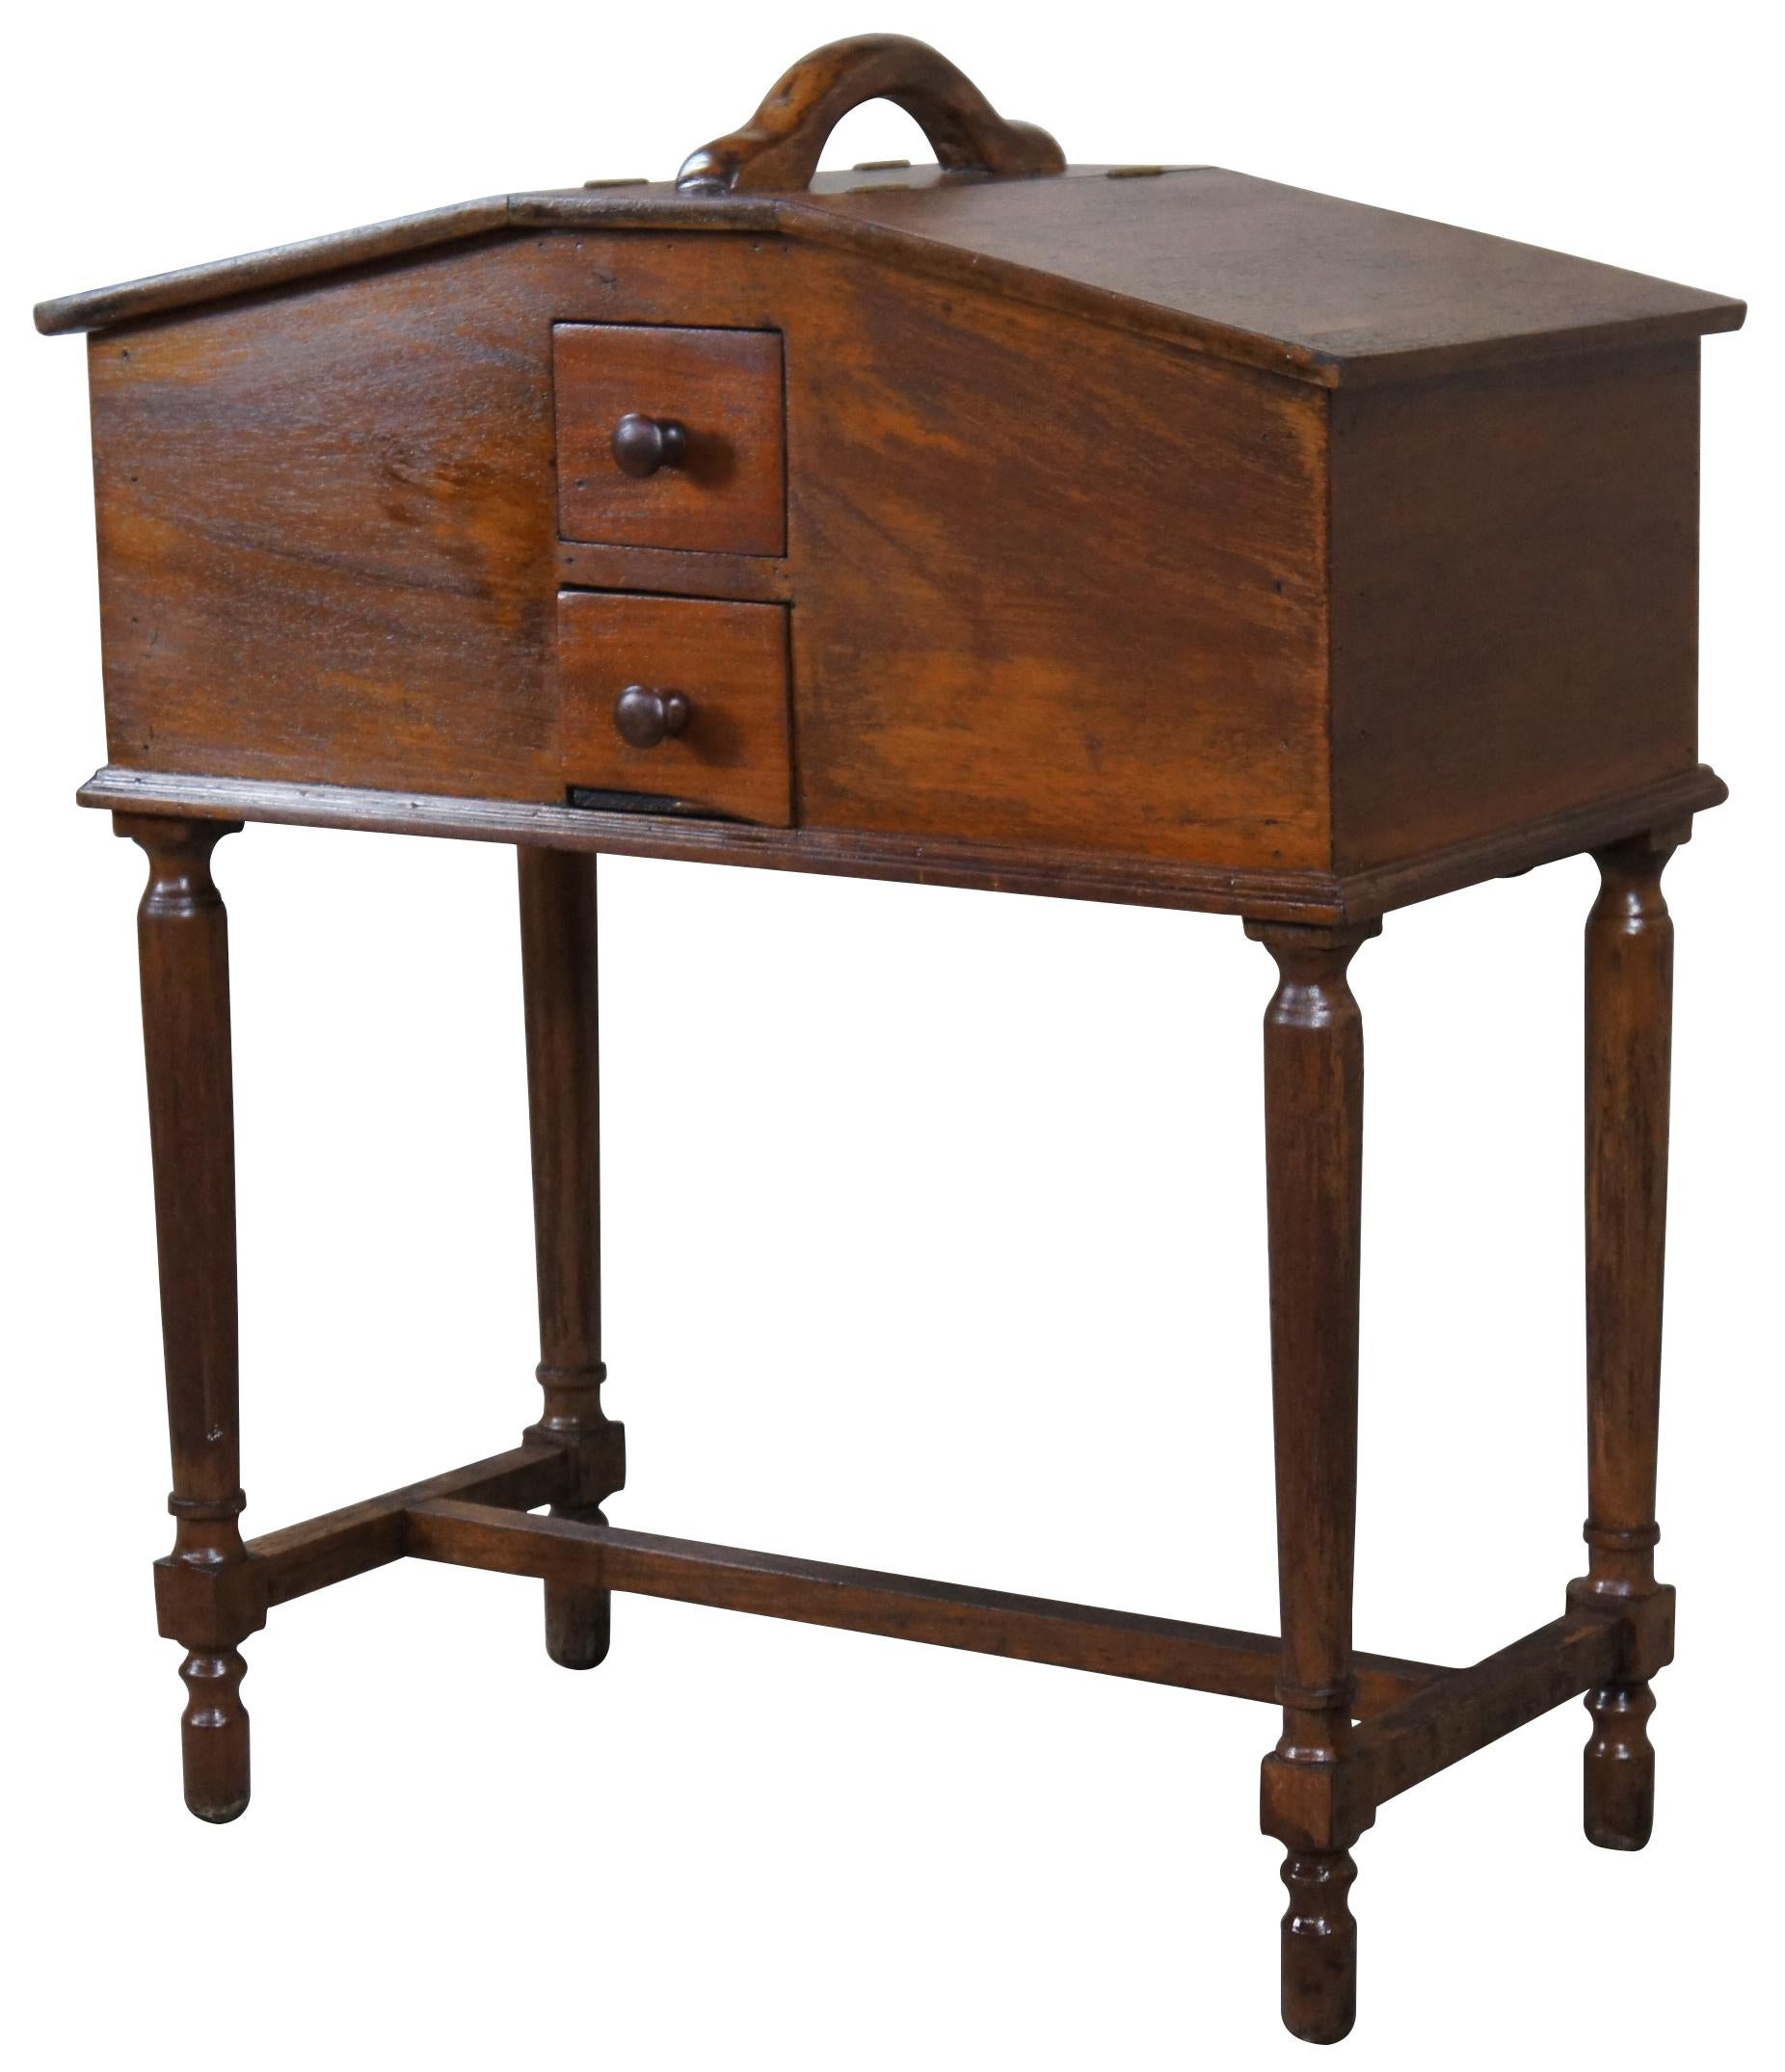 American Colonial Antique Early American Style Walnut Standing Sewing Box Lidded Cabinet Table